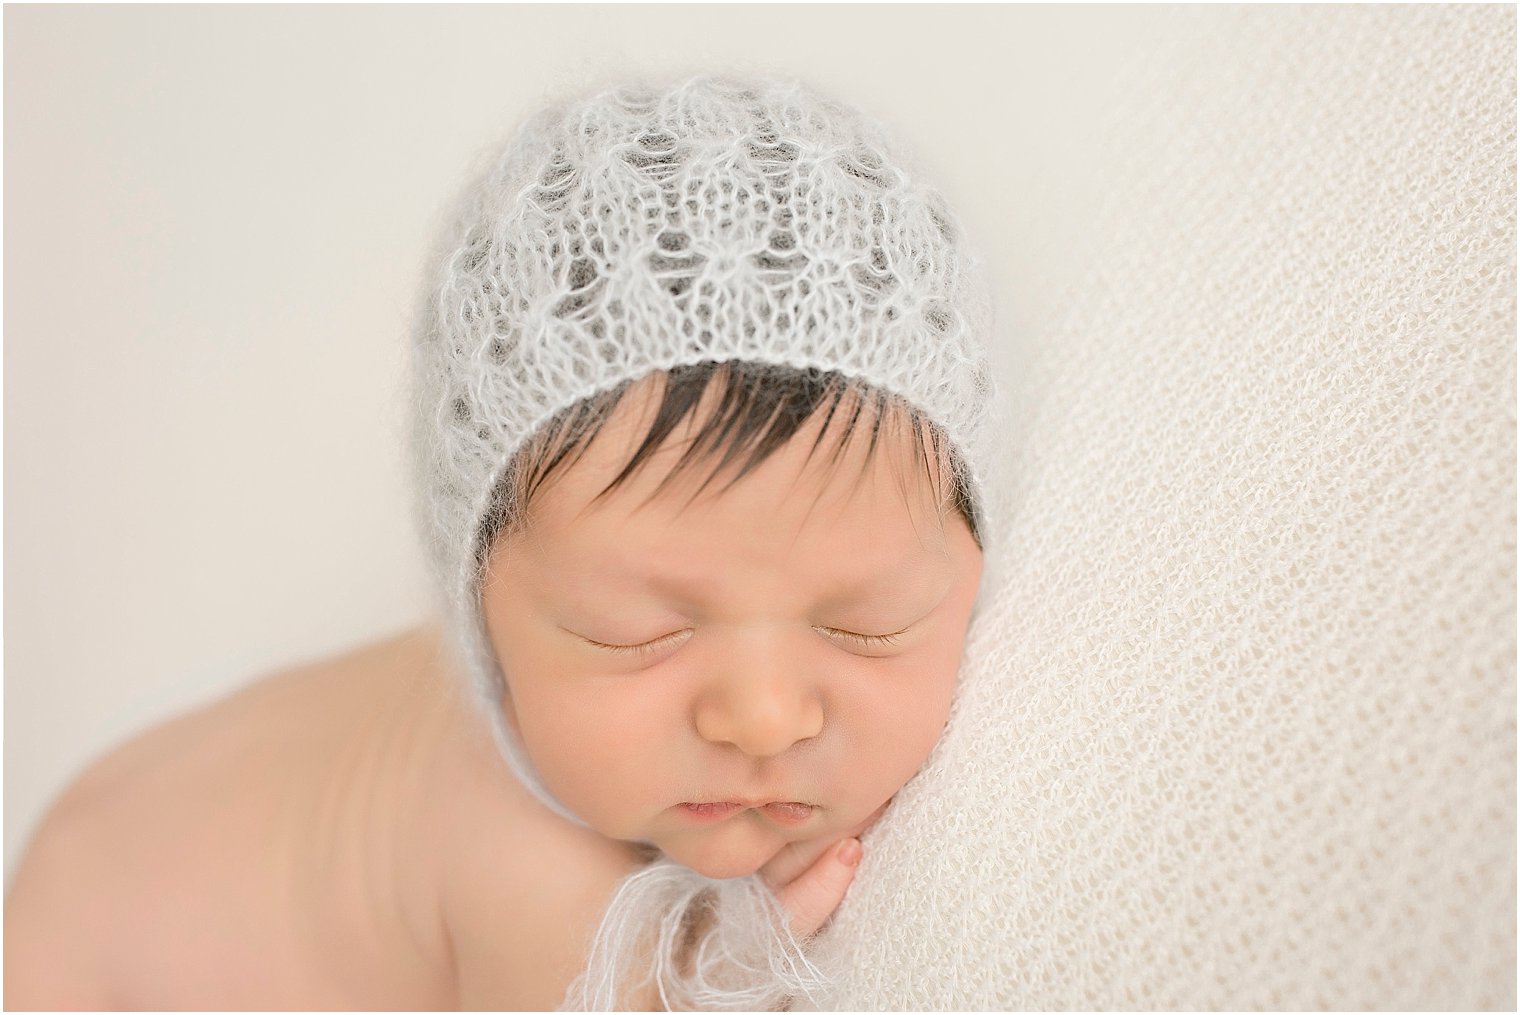 Light blue mohair hat by Blueberry Props